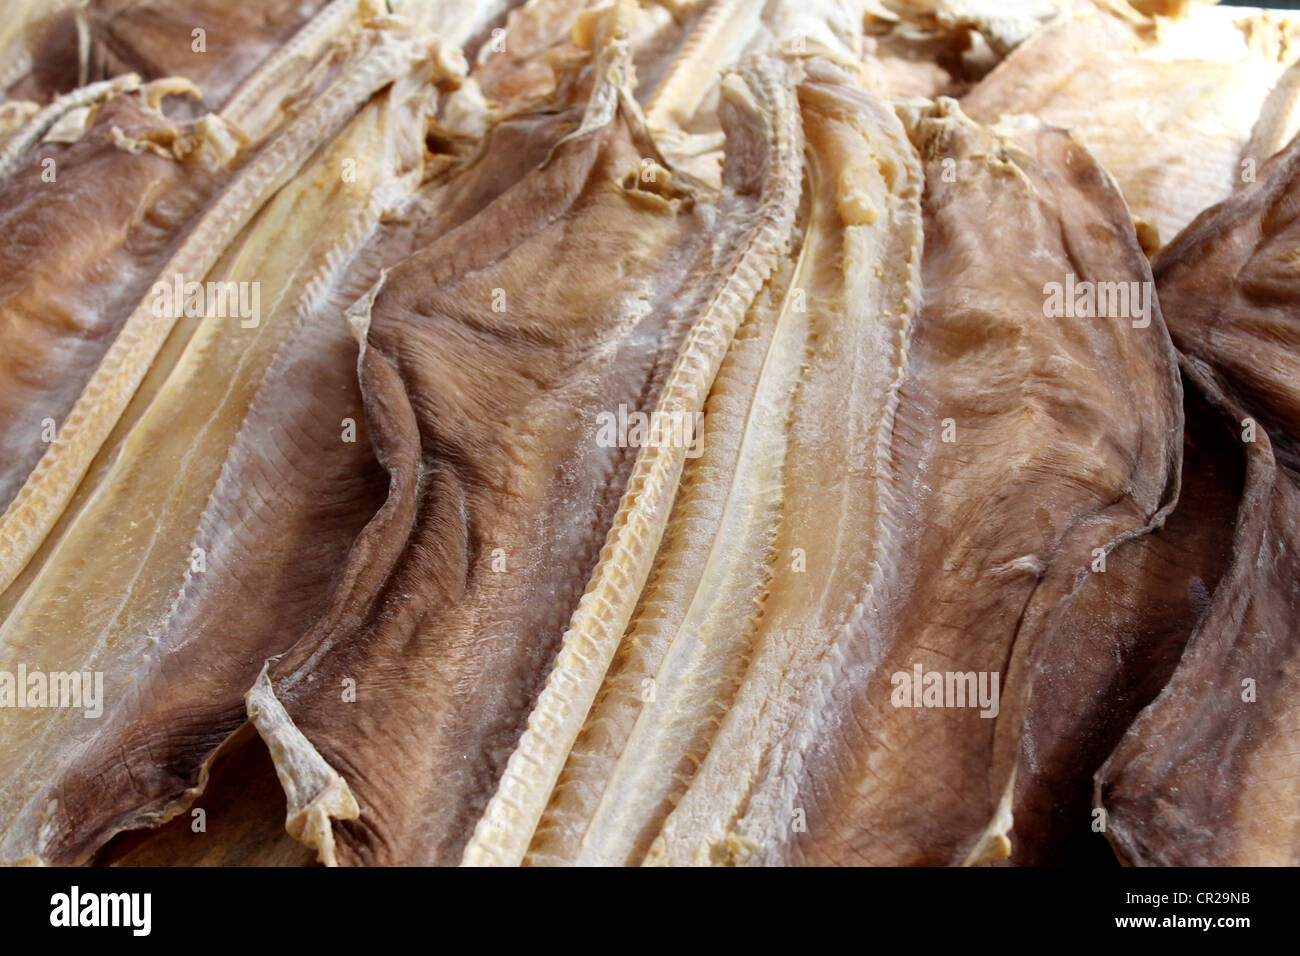 A close up of Madeiran cod fish from the fish market in Funchal (Mercado Dos Lavradores) Stock Photo